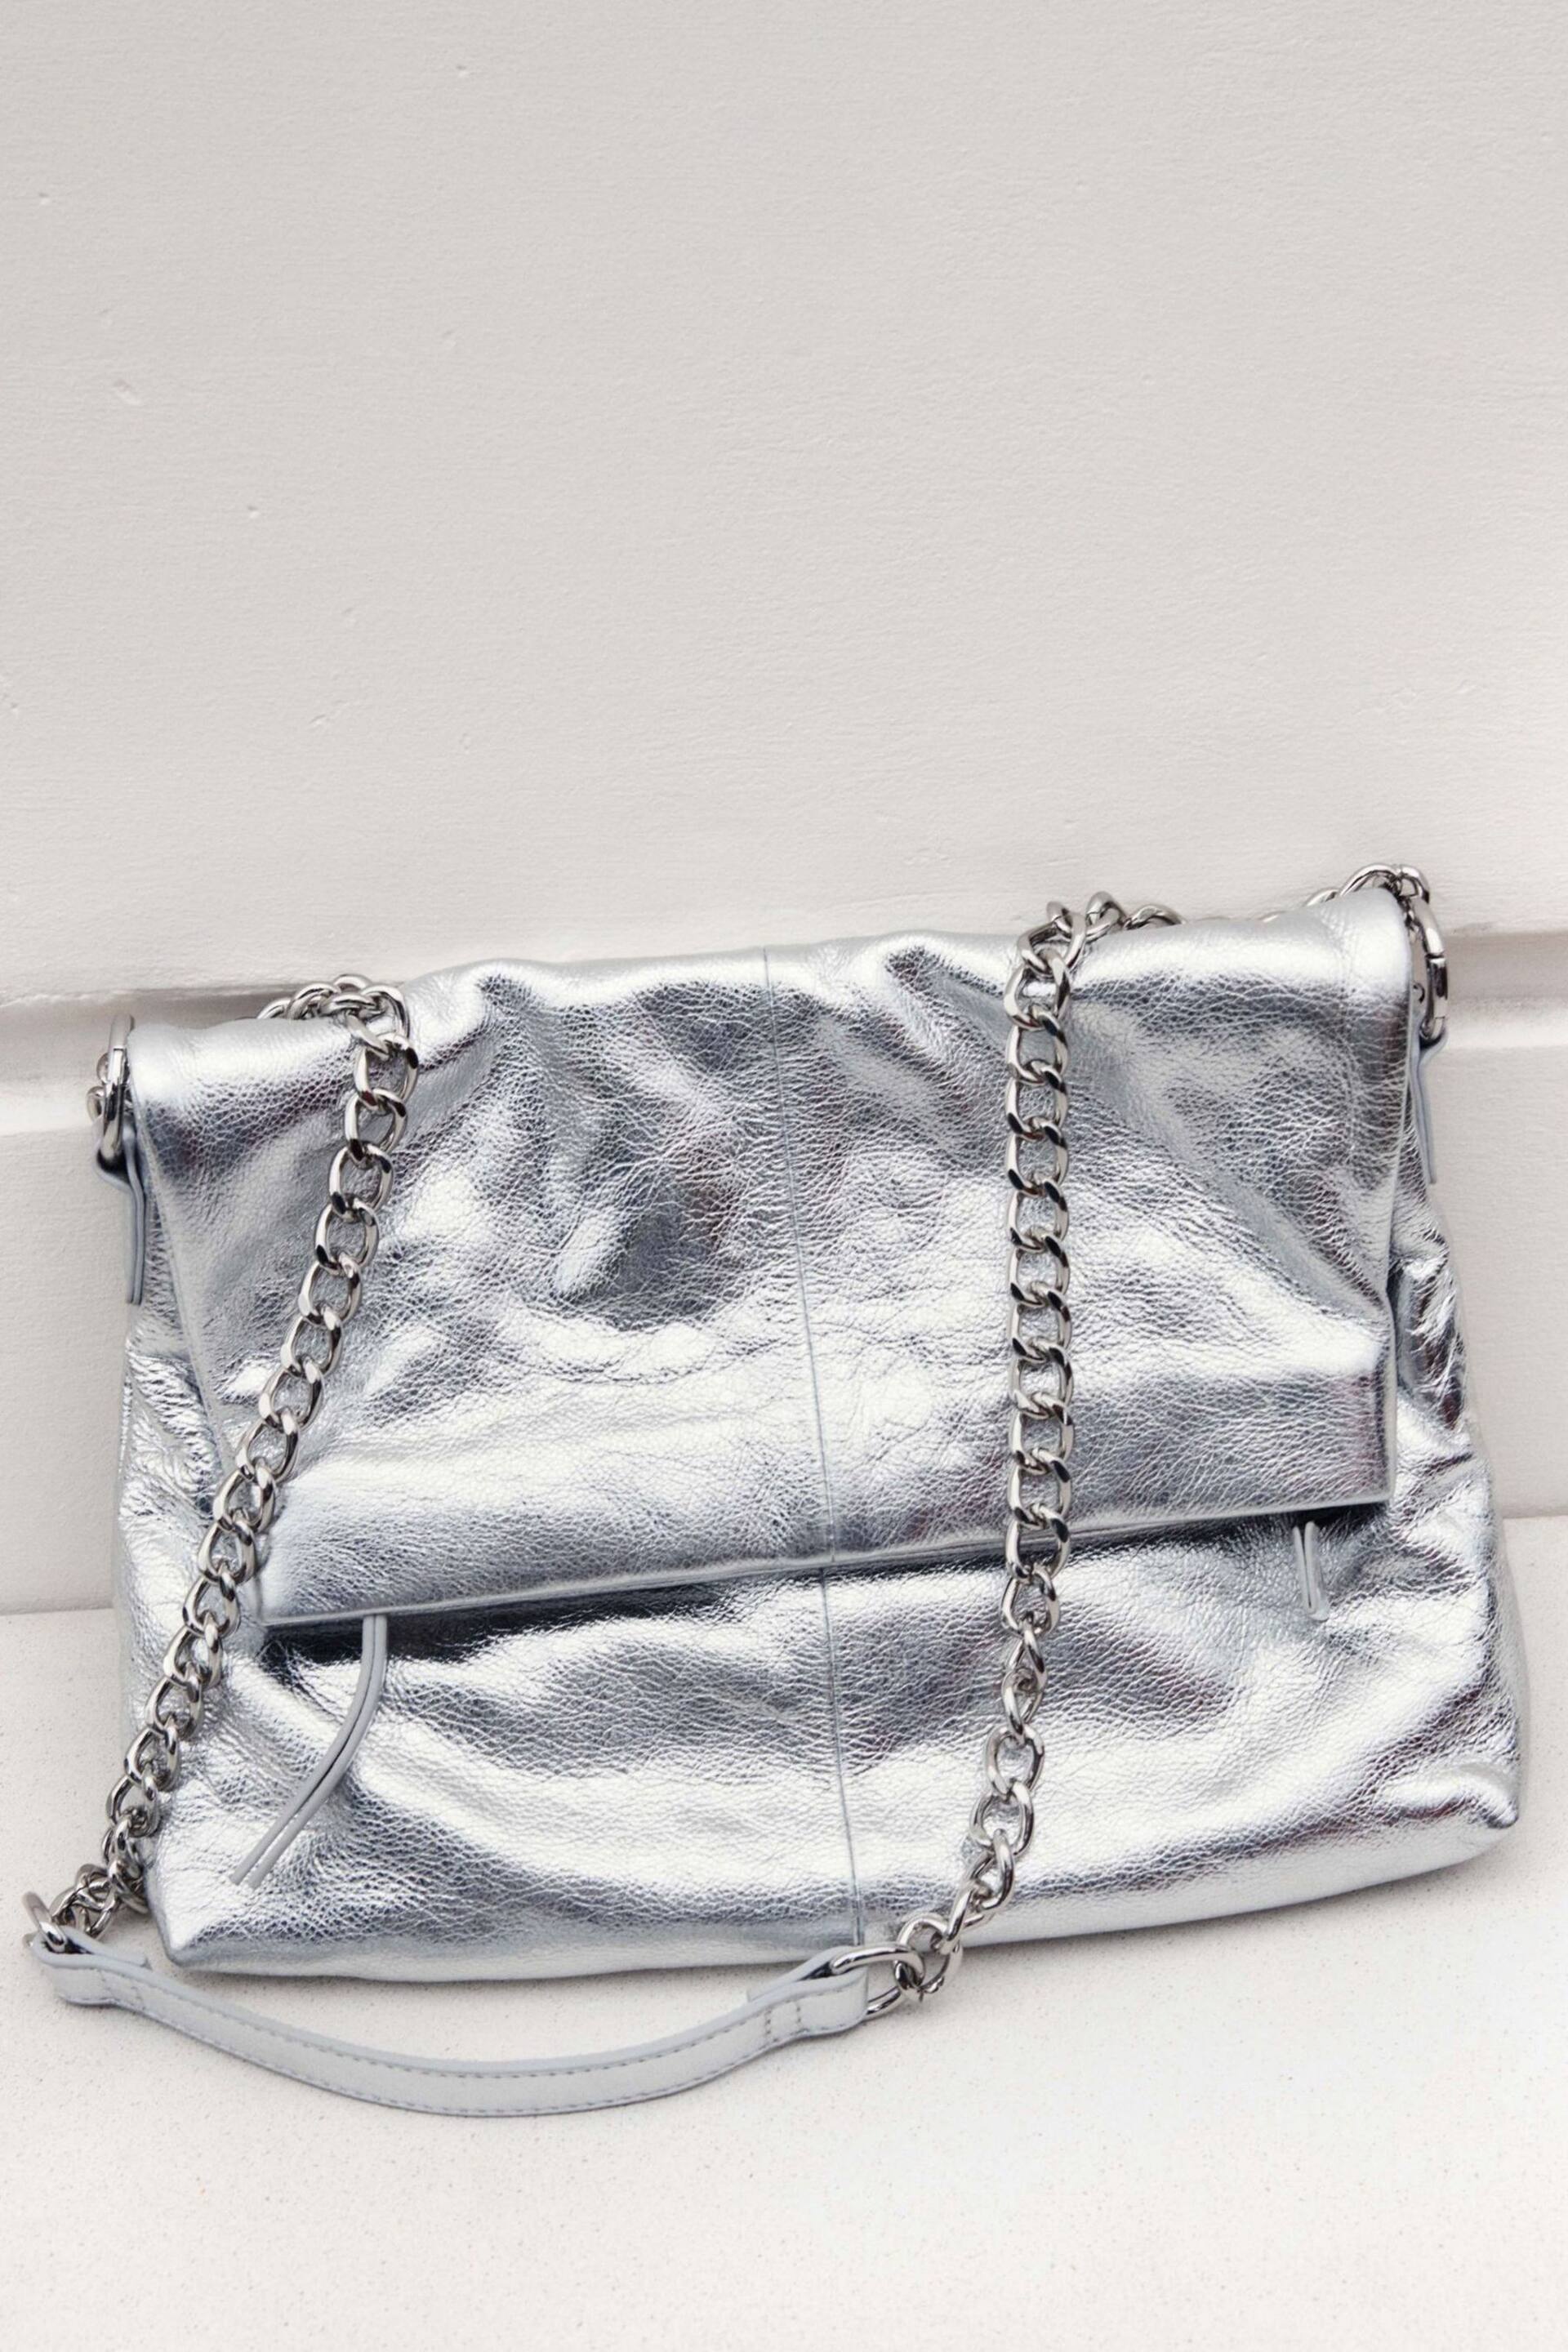 Hush Silver Perrie Chain Cross-body Bag - Image 3 of 5